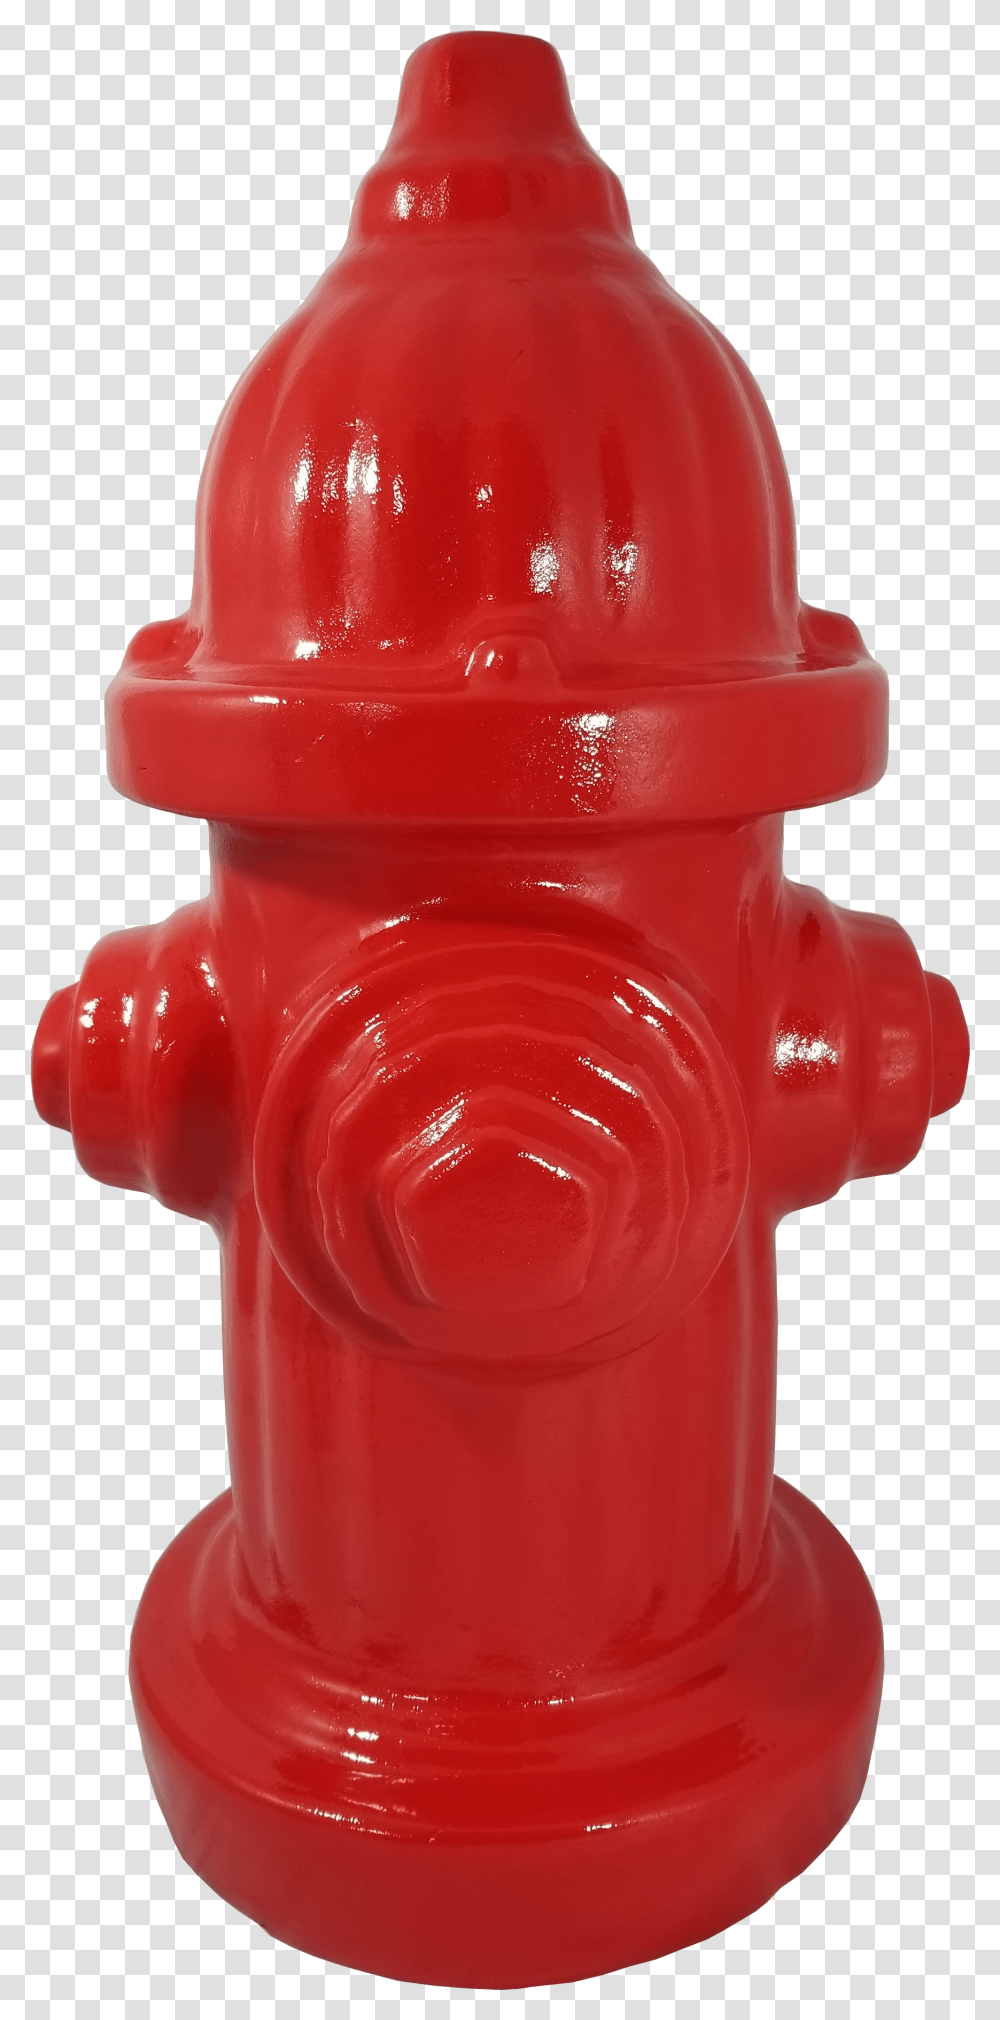 Fire Hydrant Images Free Download Transparent Png